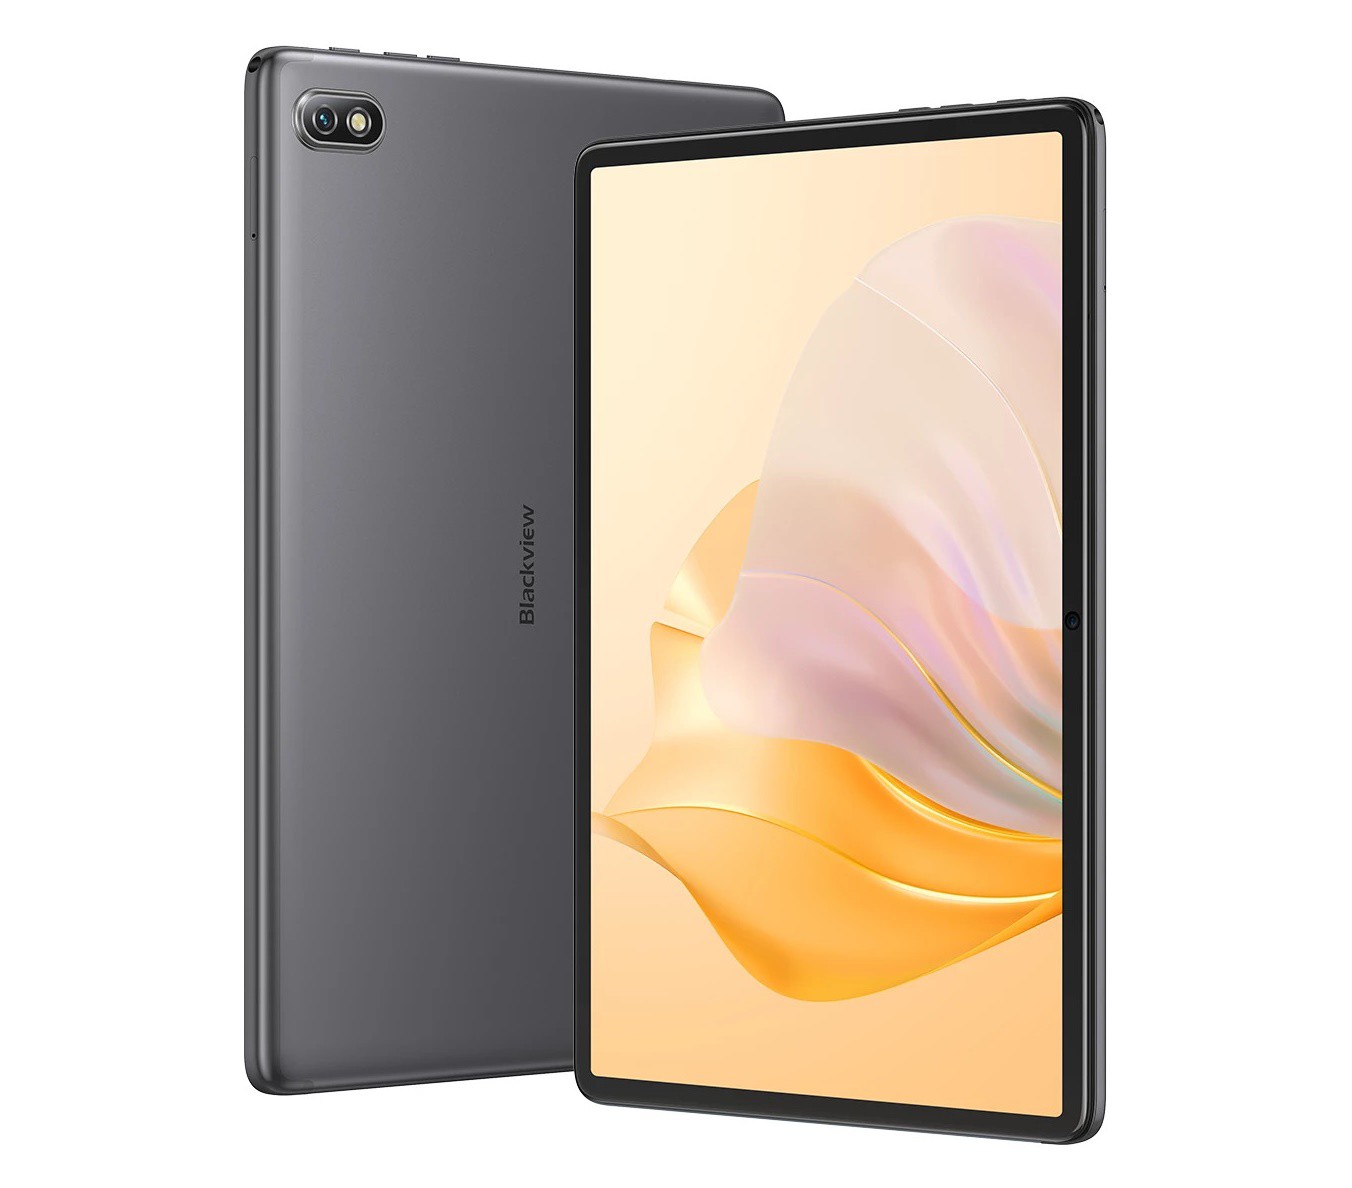 Blackview Tab 7 specifications features and price